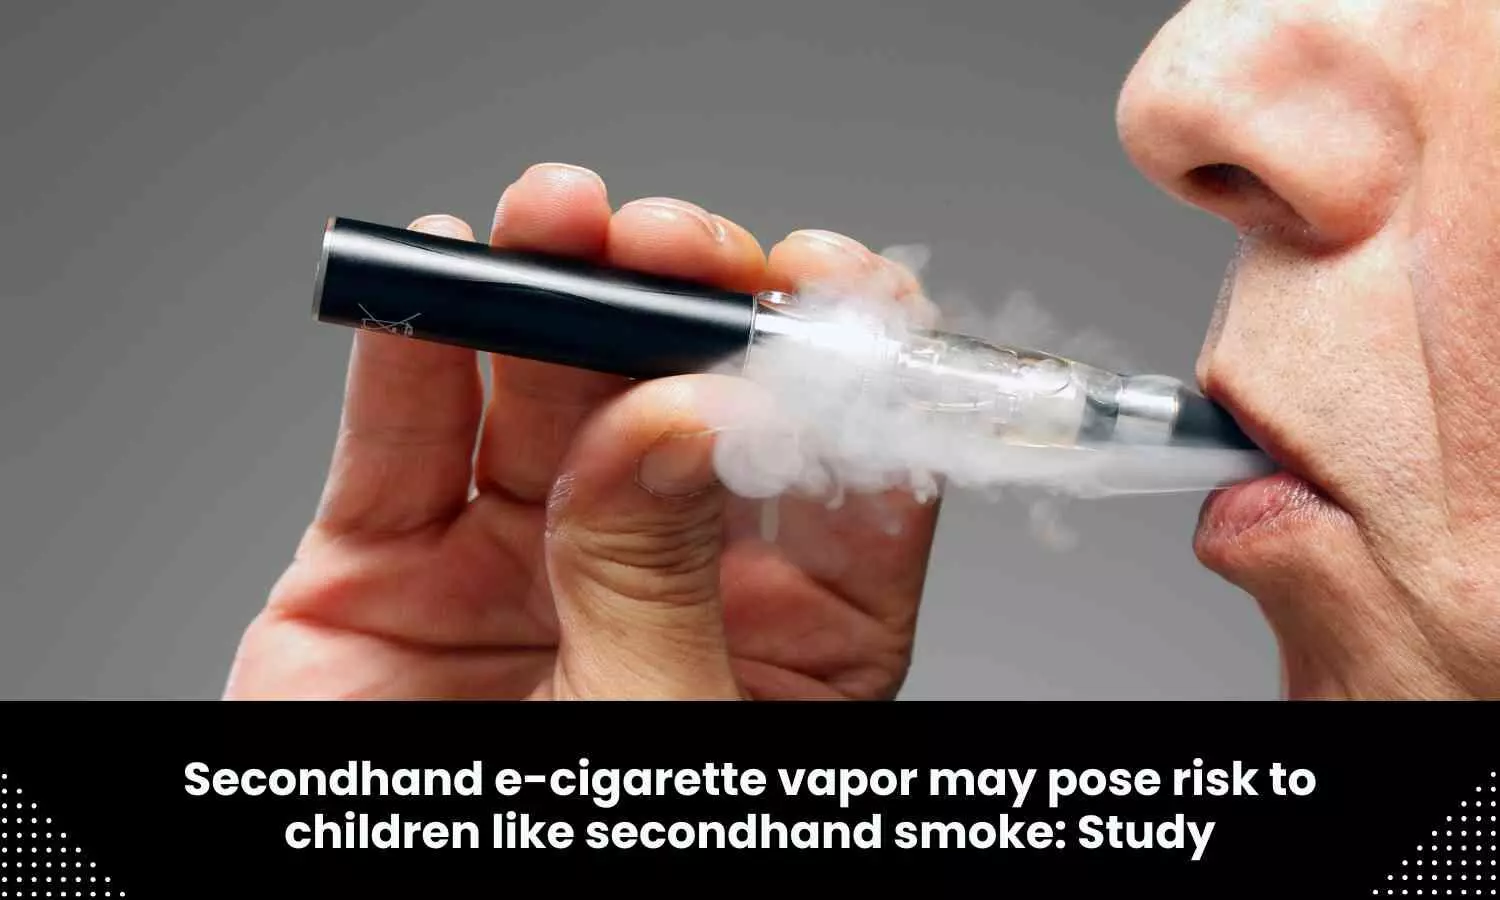 Study says secondhand e-cigarette vapor may pose risk to children like secondhand smoke